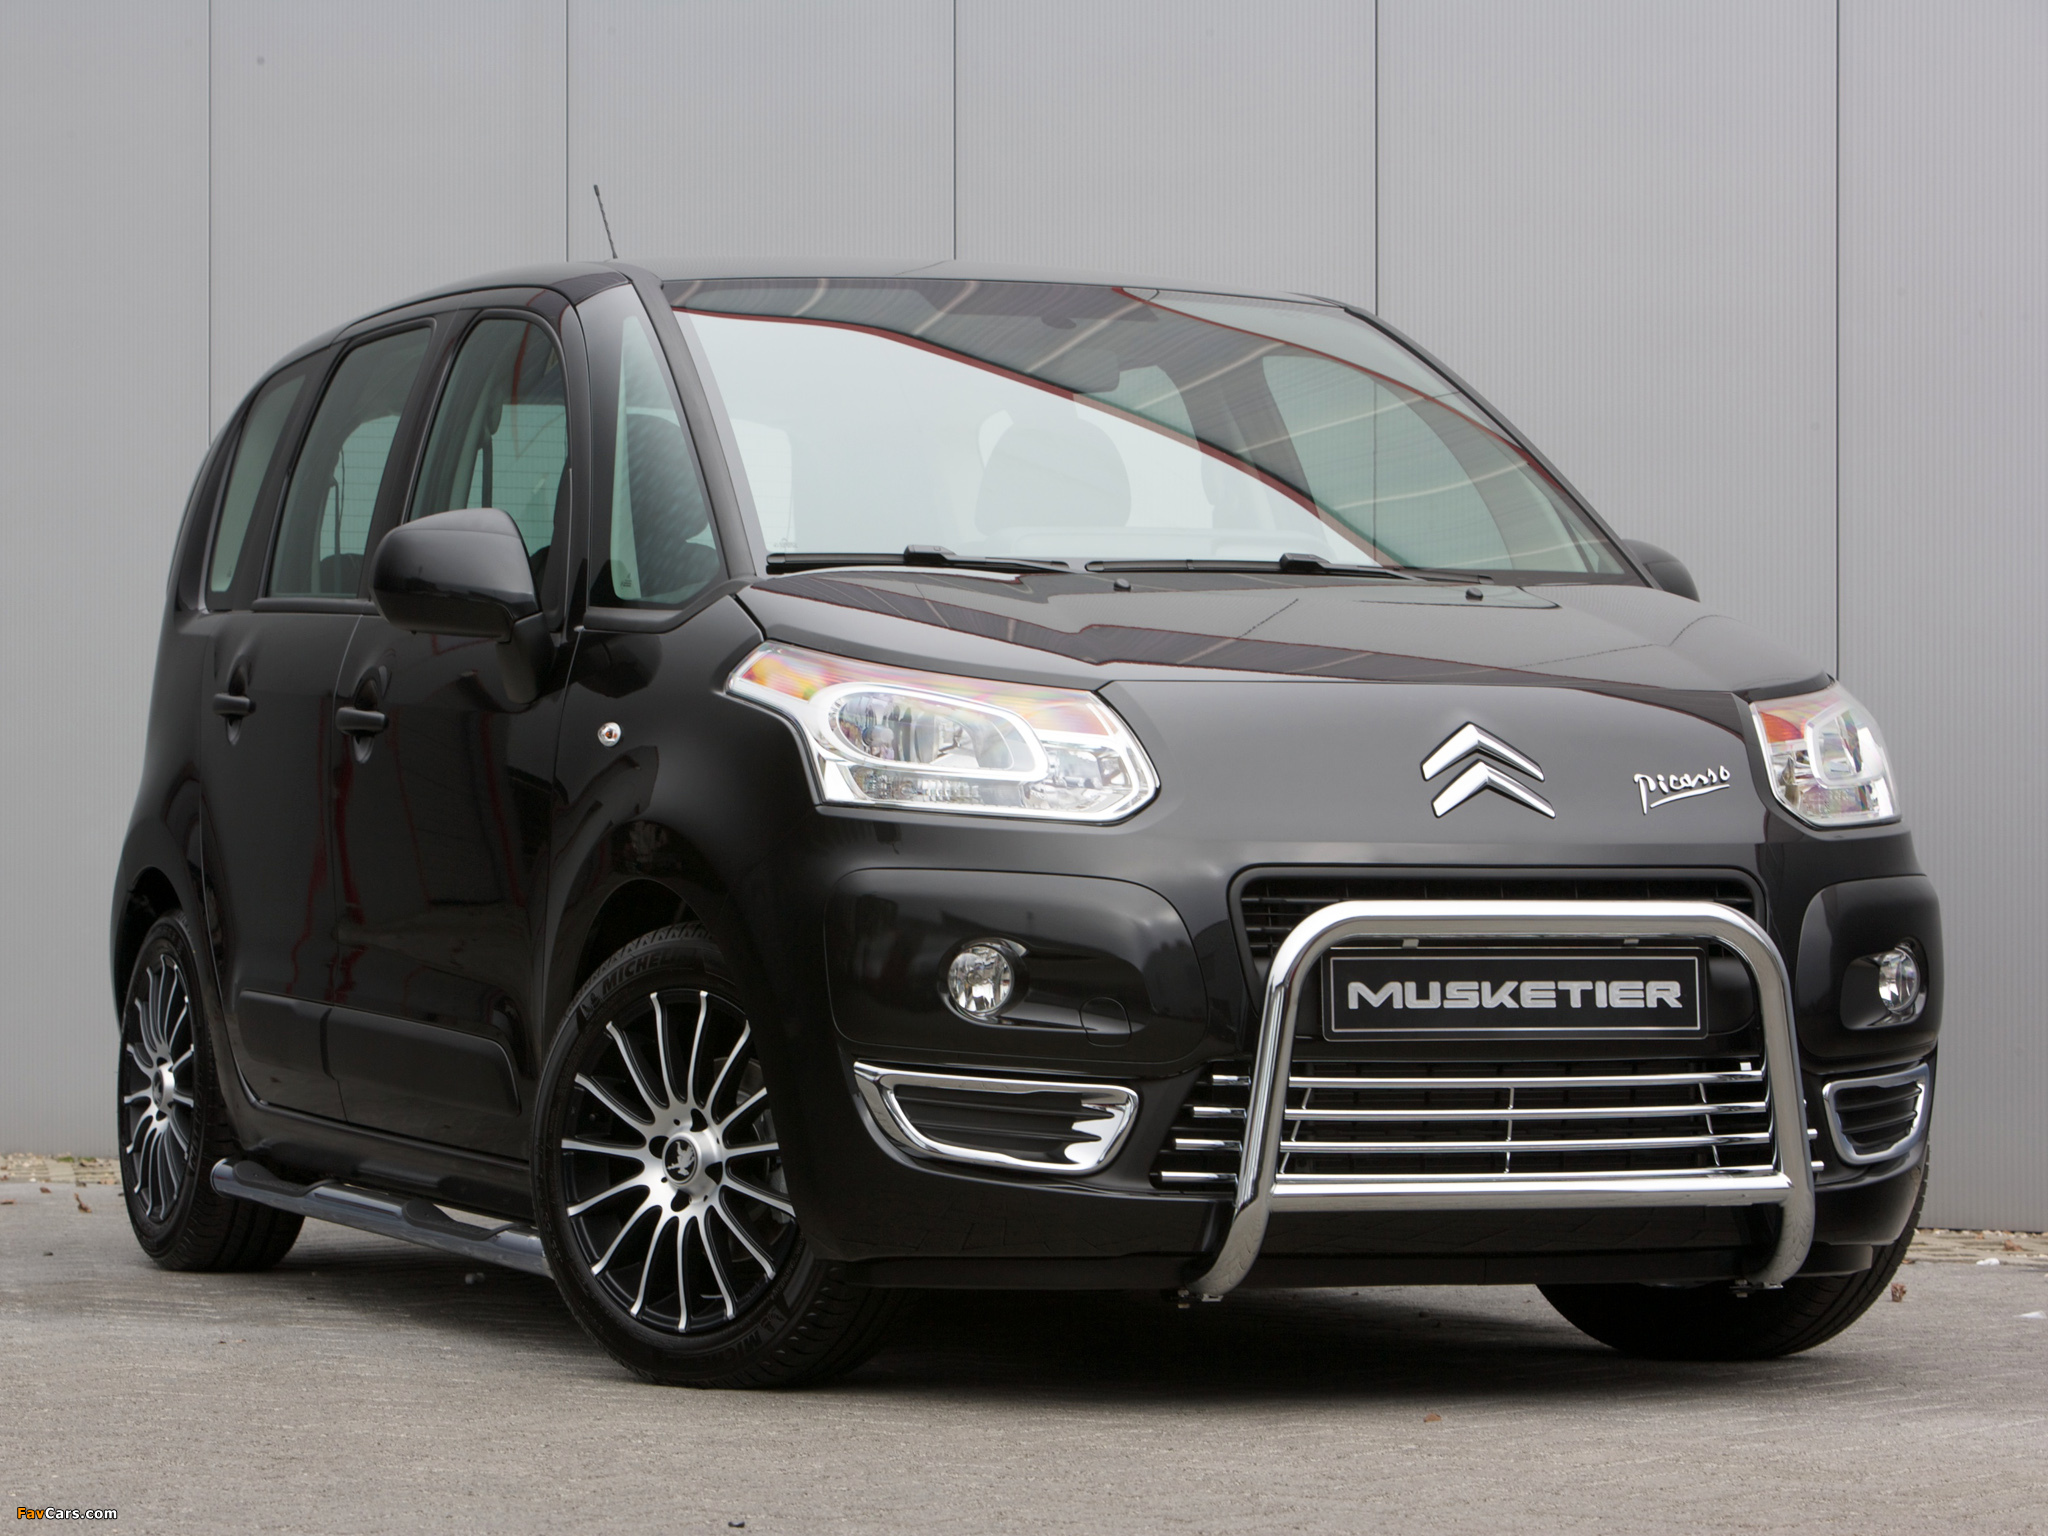 Images of Musketier Citroën C3 Picasso 2009 (2048 x 1536)